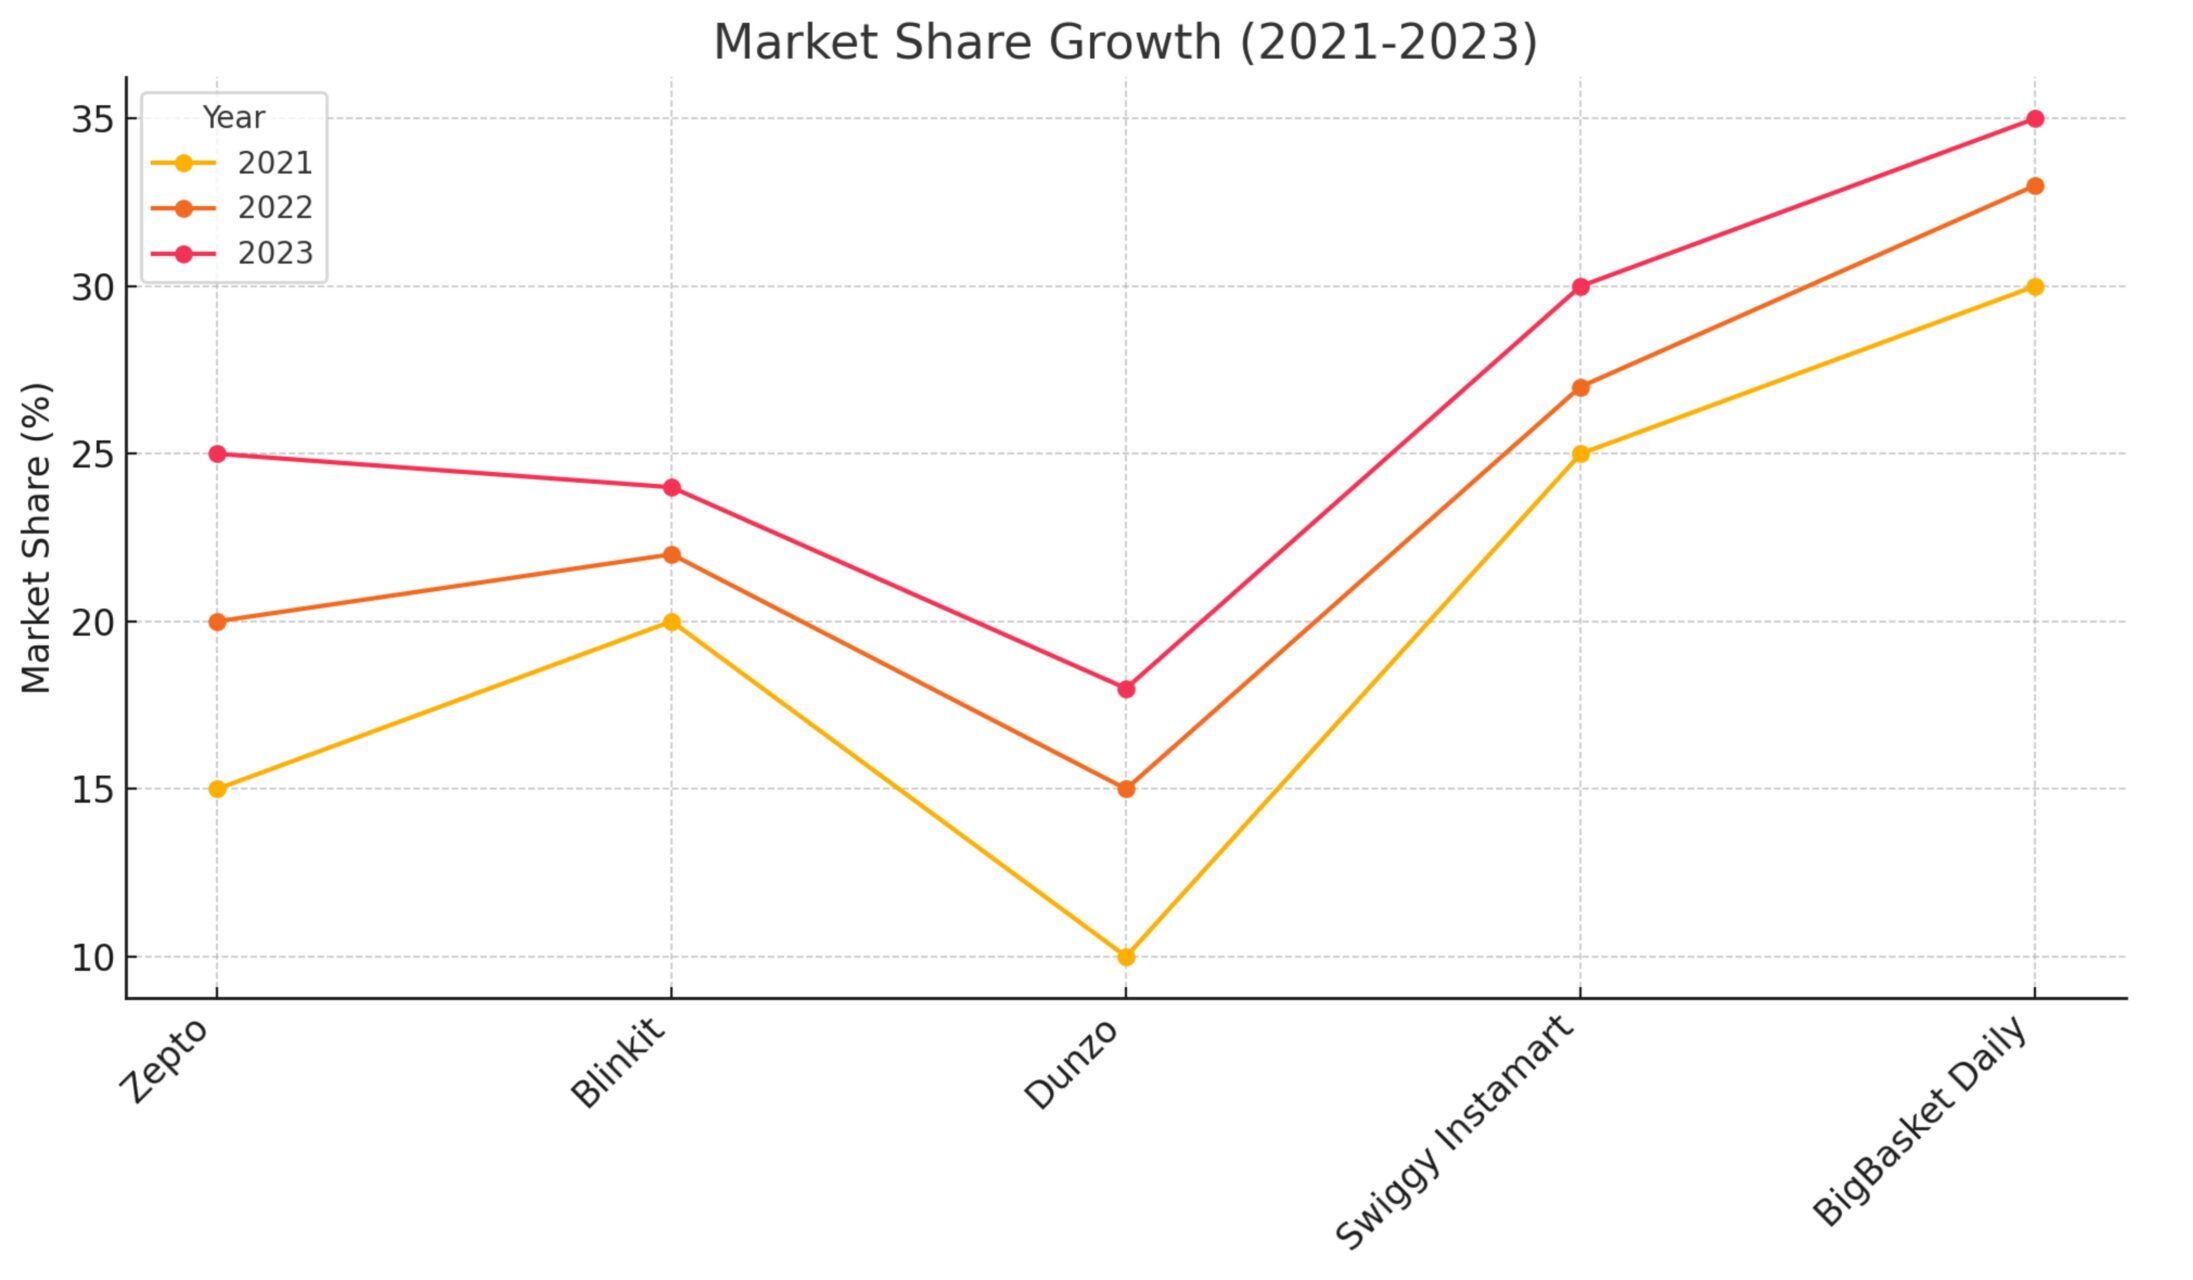 Line graph showing market share growth from 2021 to 2023 for Zepto, Blinkit, Dunzo, Swiggy Instamart, and BigBasket Daily. Zepto's share increases from 15% to 25%, Blinkit's from 20% to 24%, Dunzo's from 10% to 18%, Swiggy Instamart's from 25% to 30%, and BigBasket Daily's from 30% to 35%.